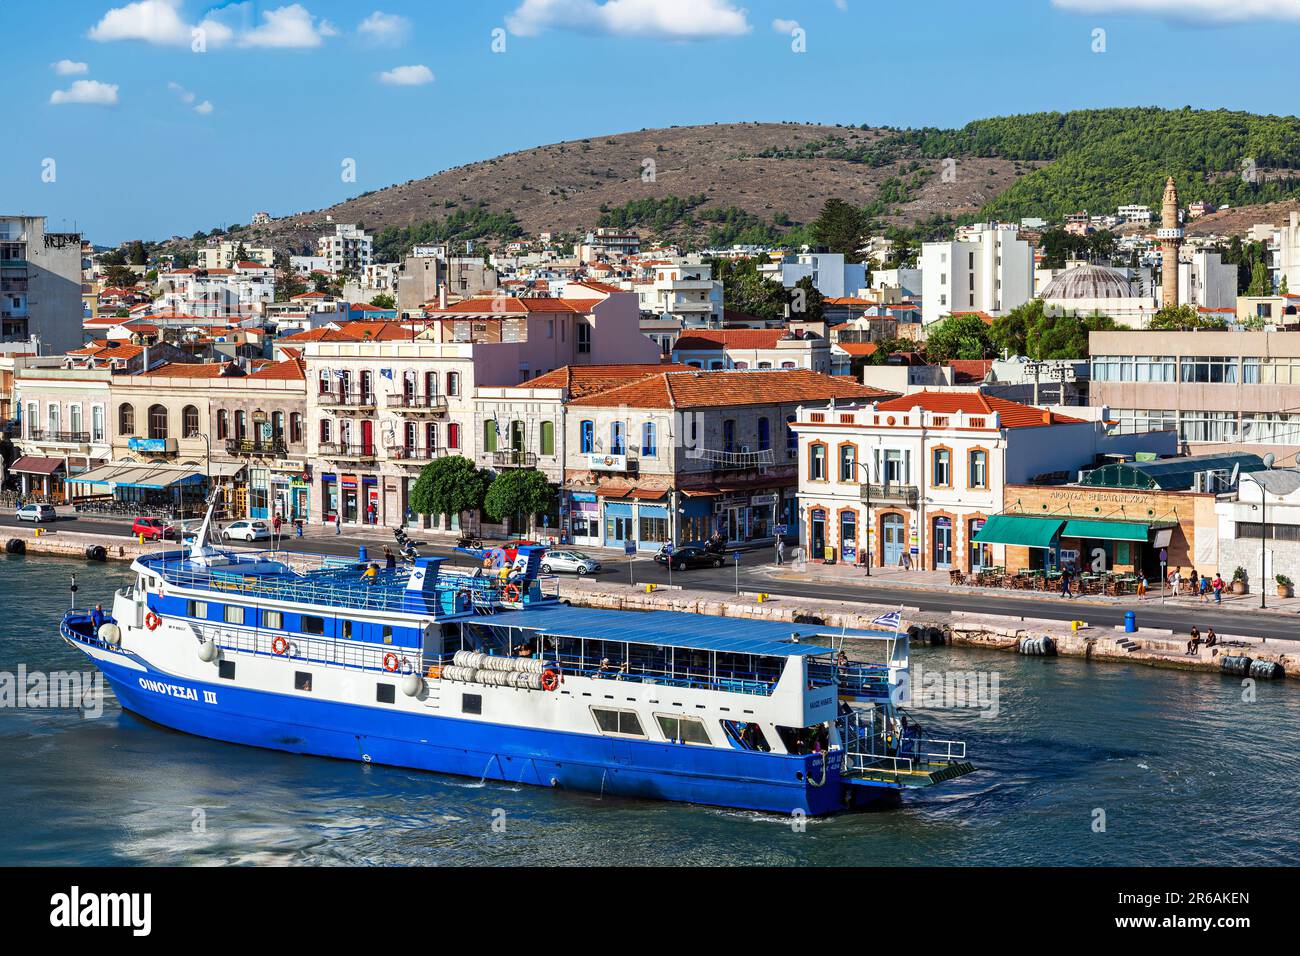 View of Chios town and port, as seen from aboard a vessel. A blue touristic ship has just set sails, as it happens during the summer season. Stock Photo